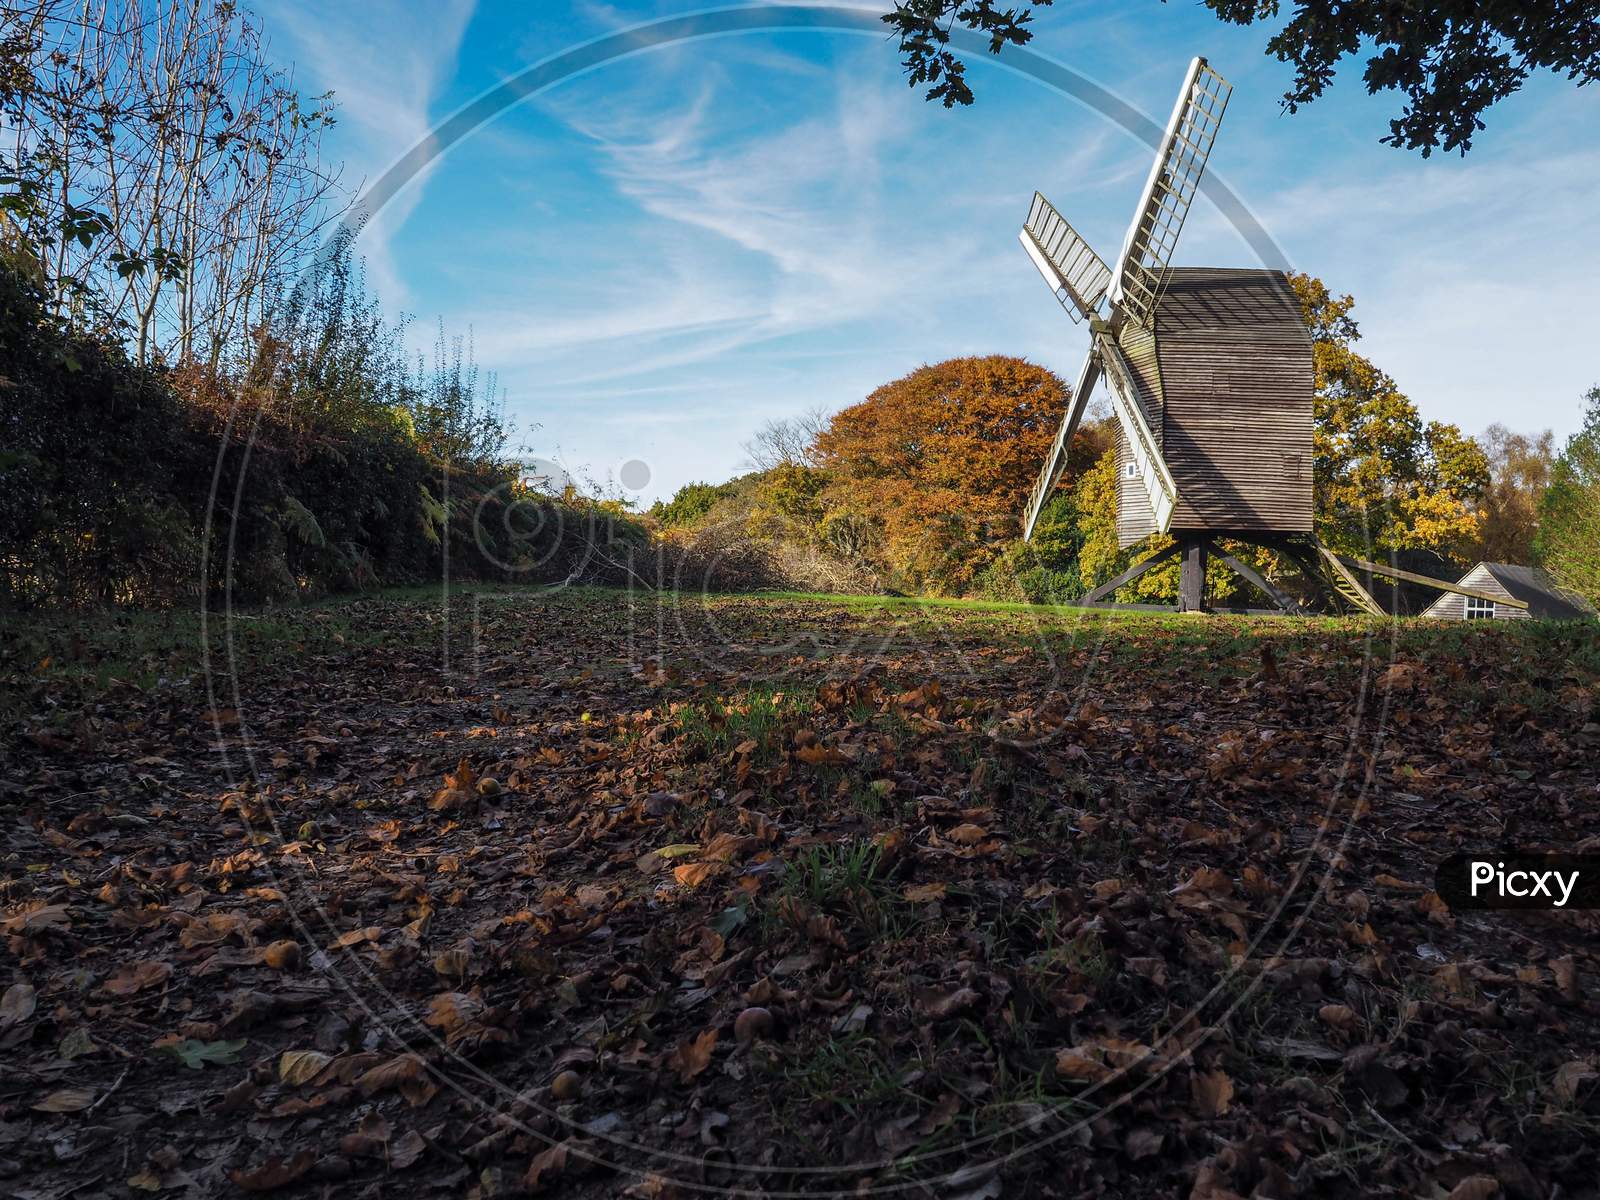 View Of Nutley Windmill In The Ashdown Forest